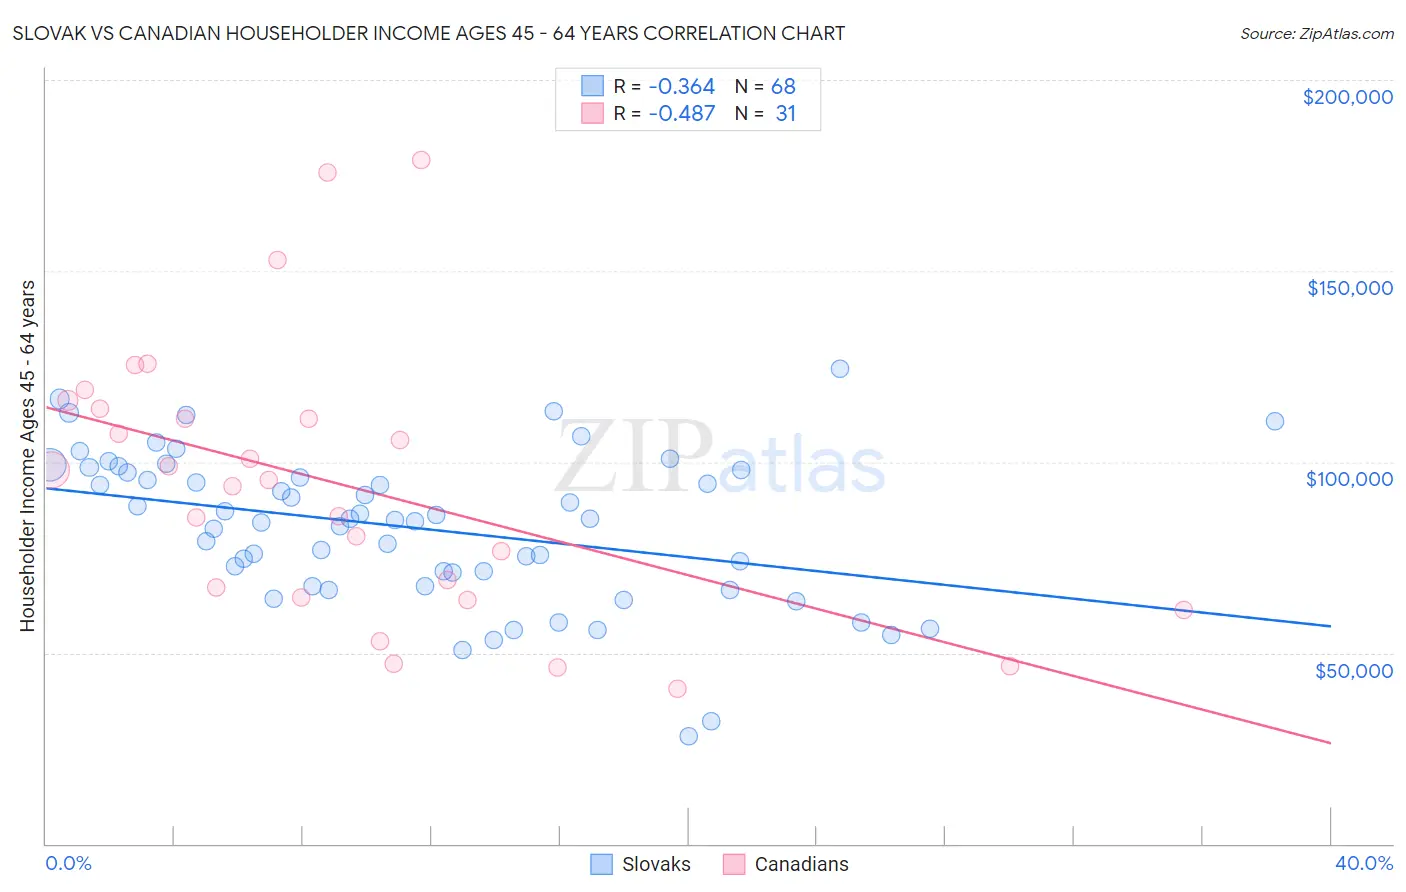 Slovak vs Canadian Householder Income Ages 45 - 64 years